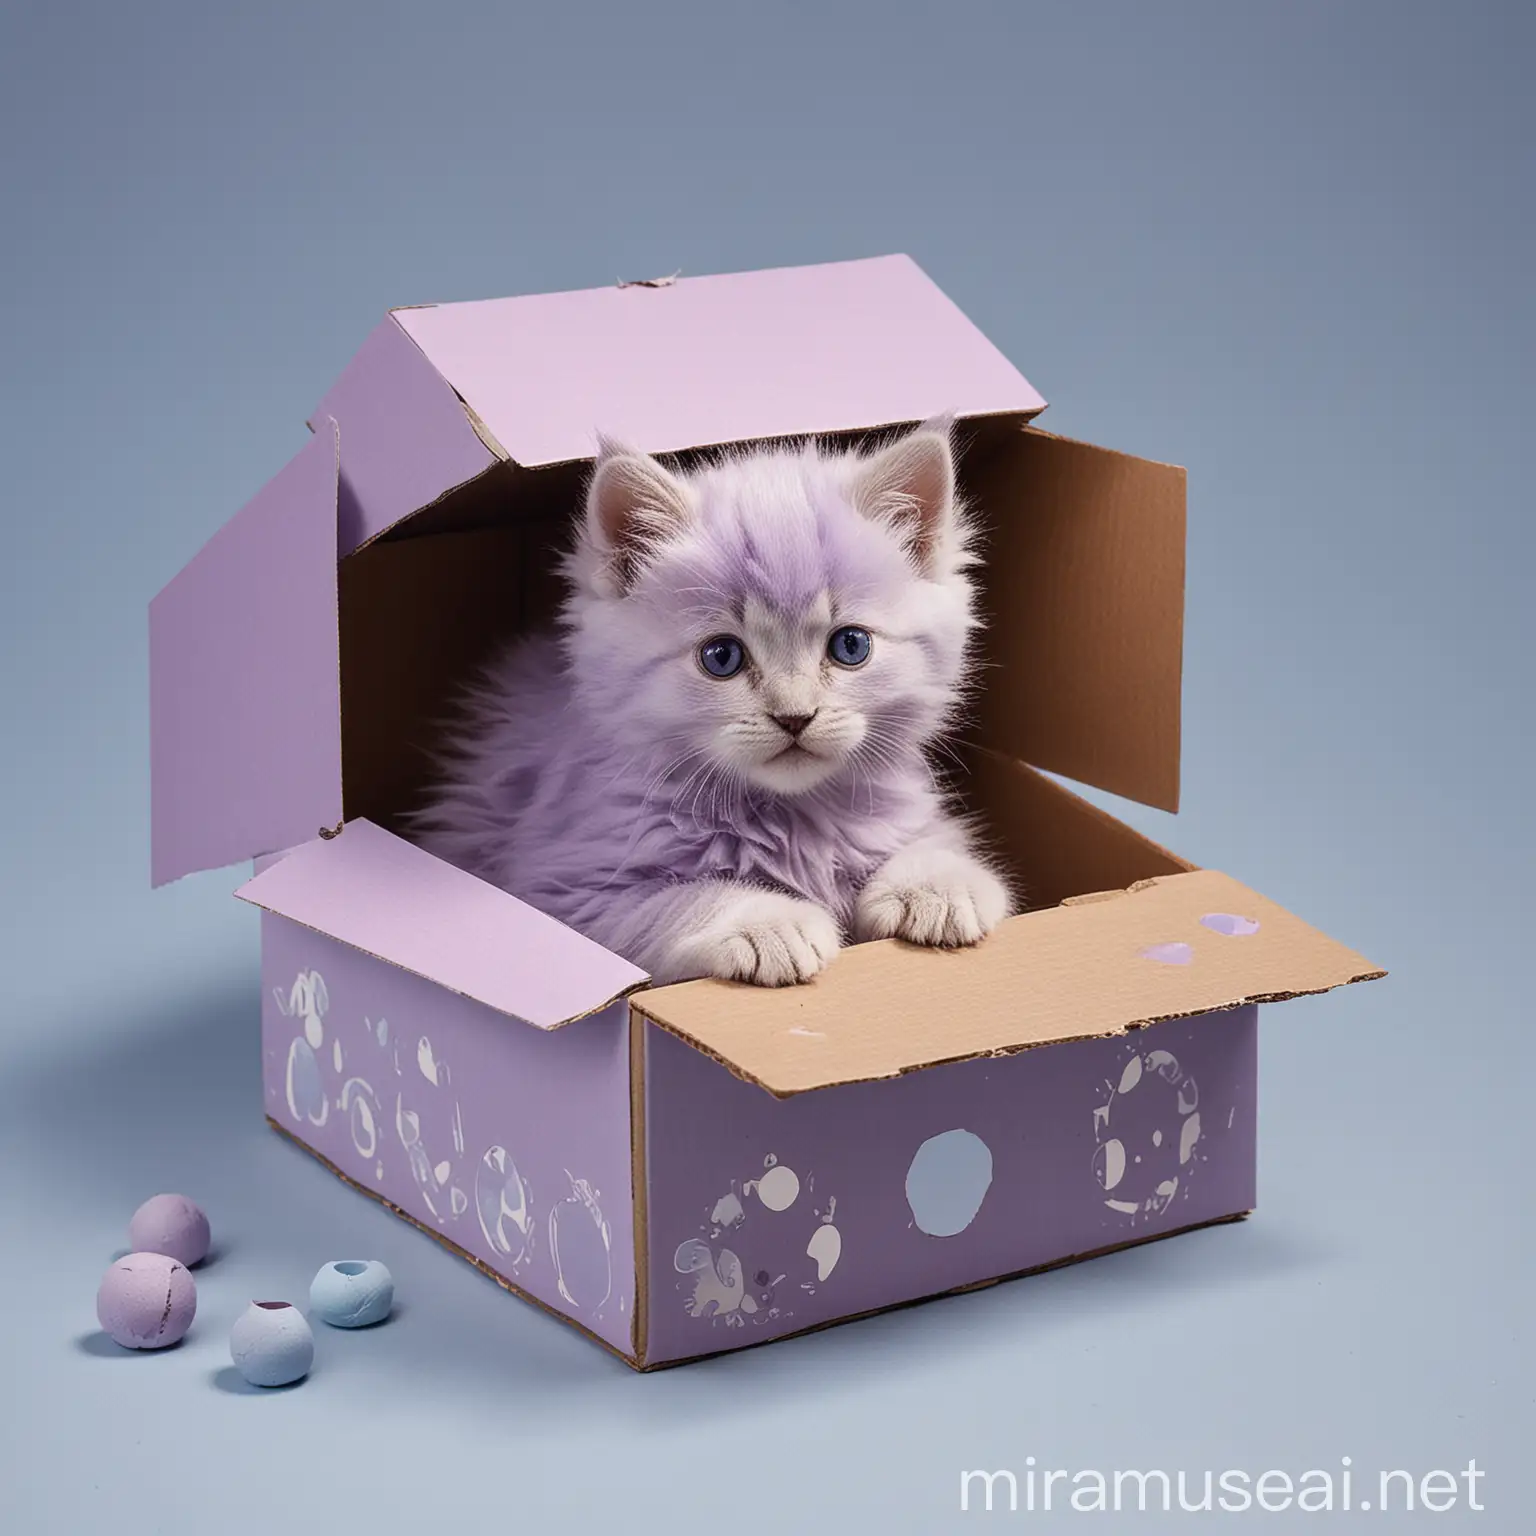 Fluffy Kitten Playing with Cardboard Box in Lilac and Blue Room